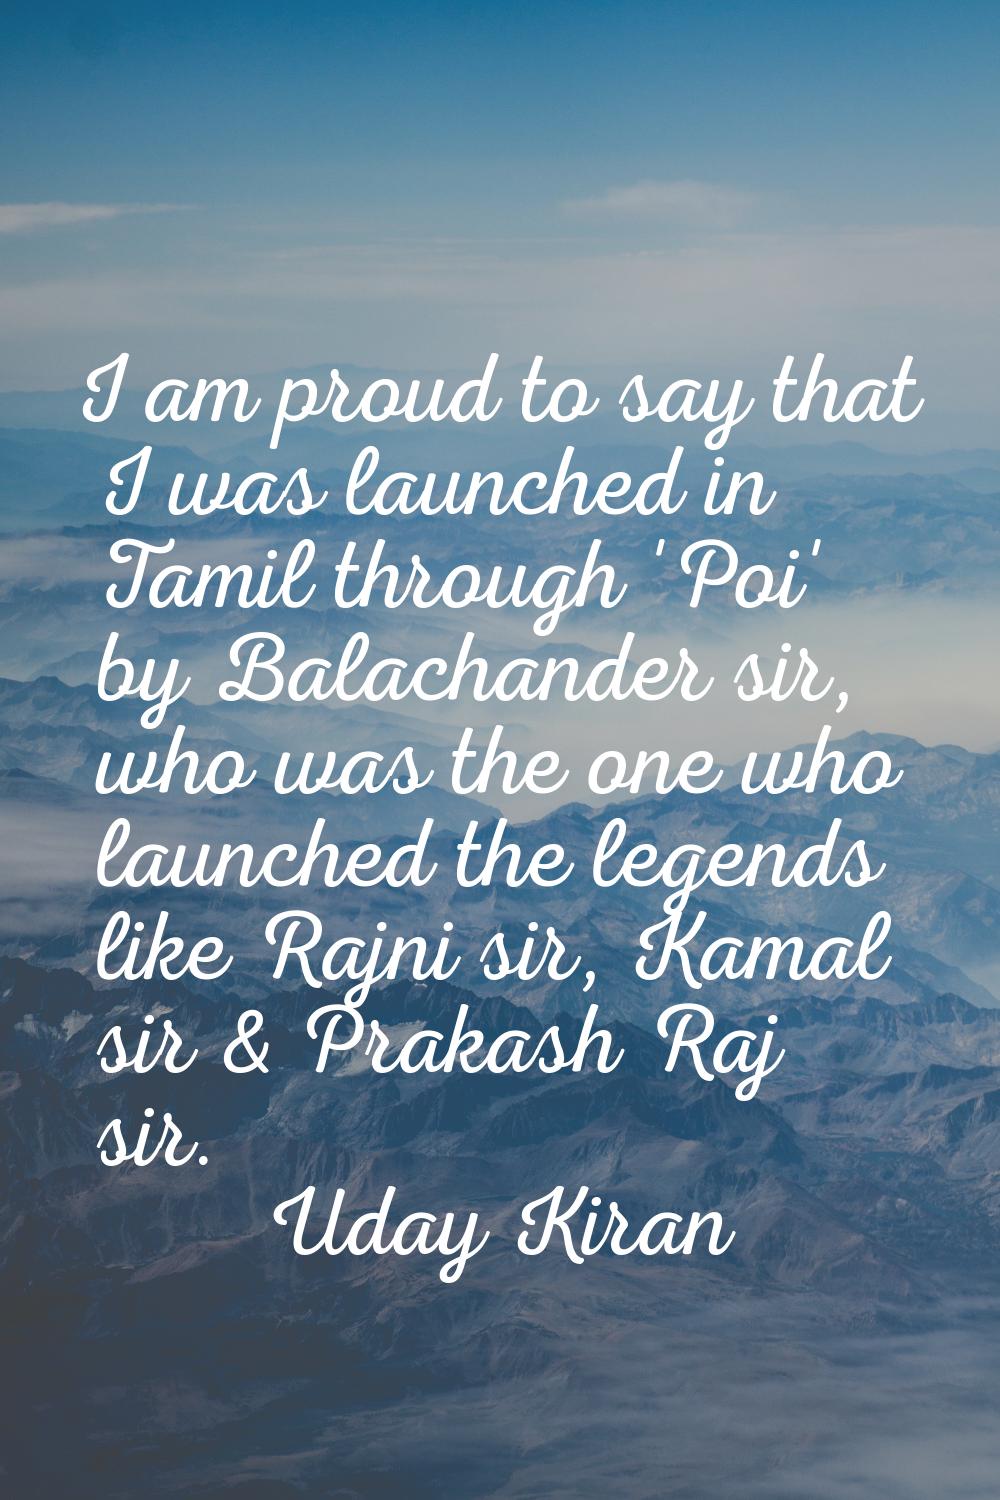 I am proud to say that I was launched in Tamil through 'Poi' by Balachander sir, who was the one wh